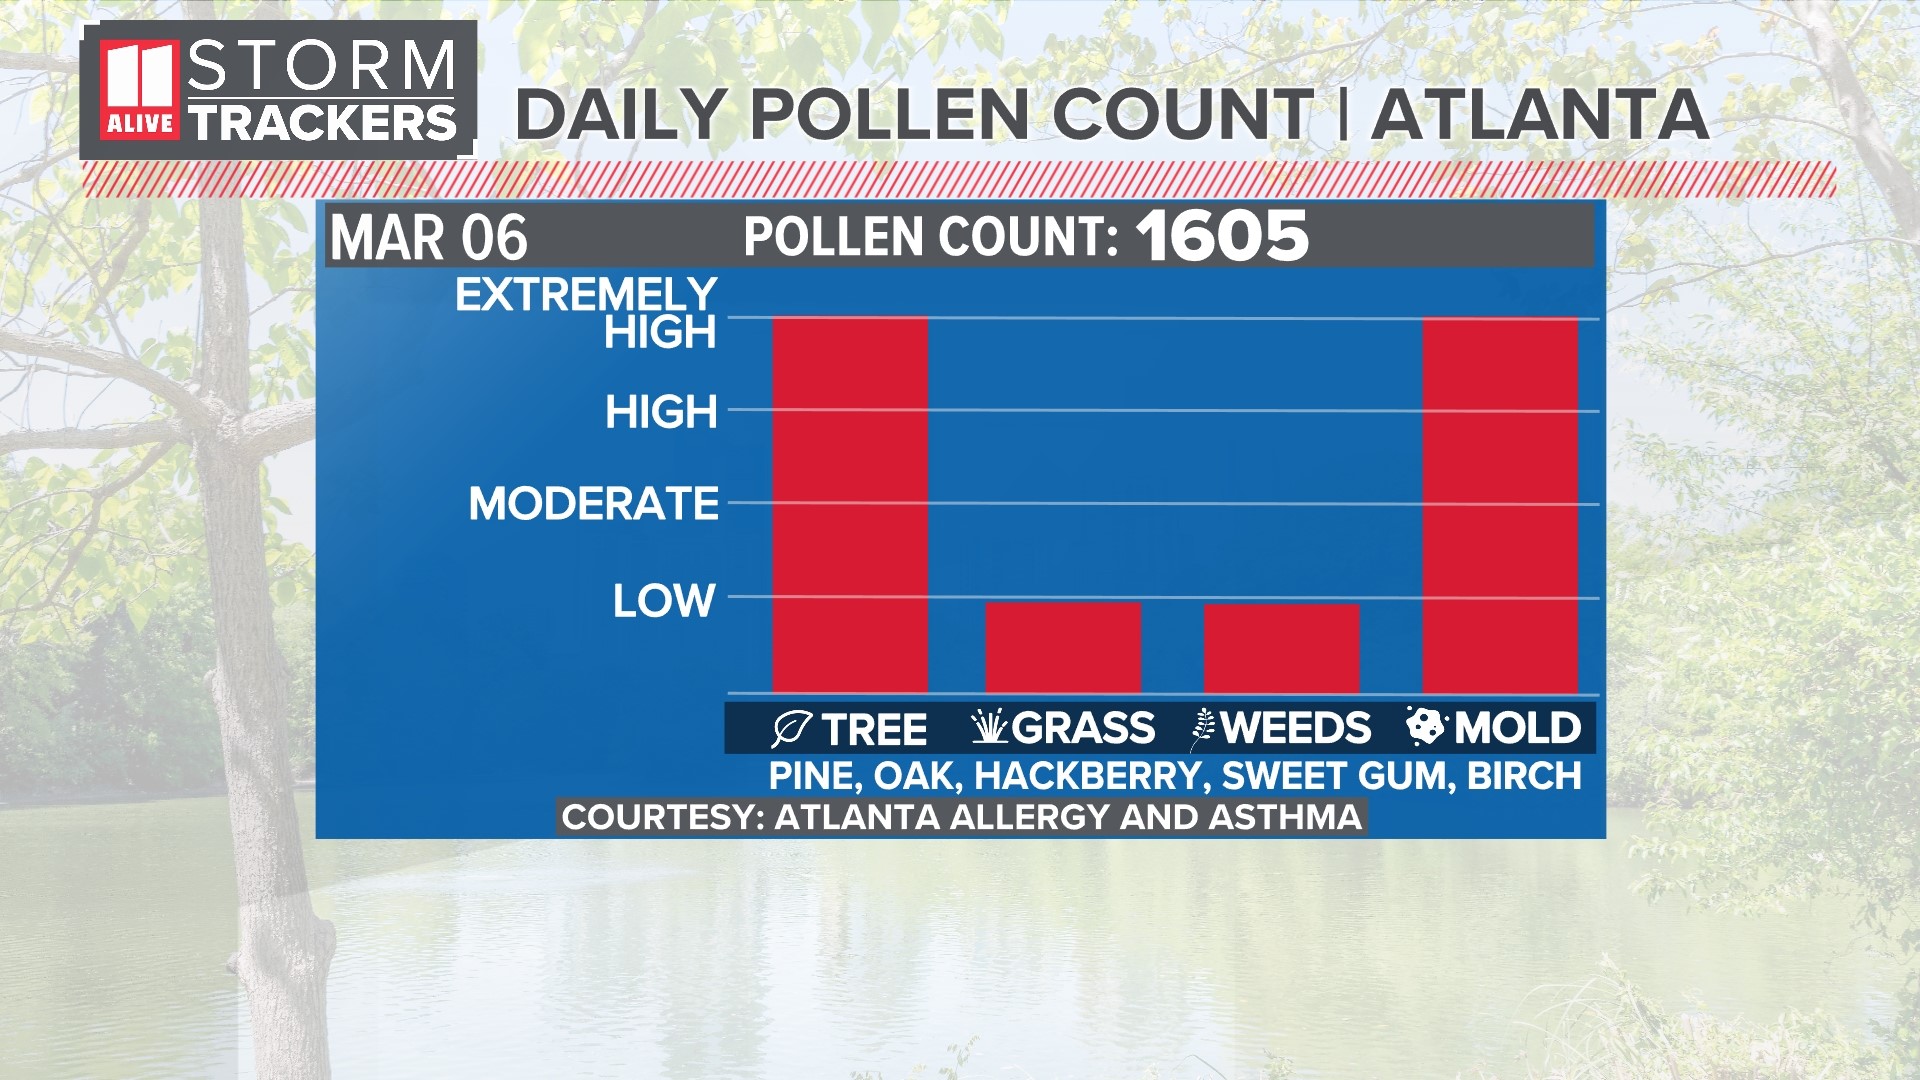 Pollen count records in Atlanta go back more than 30 years.